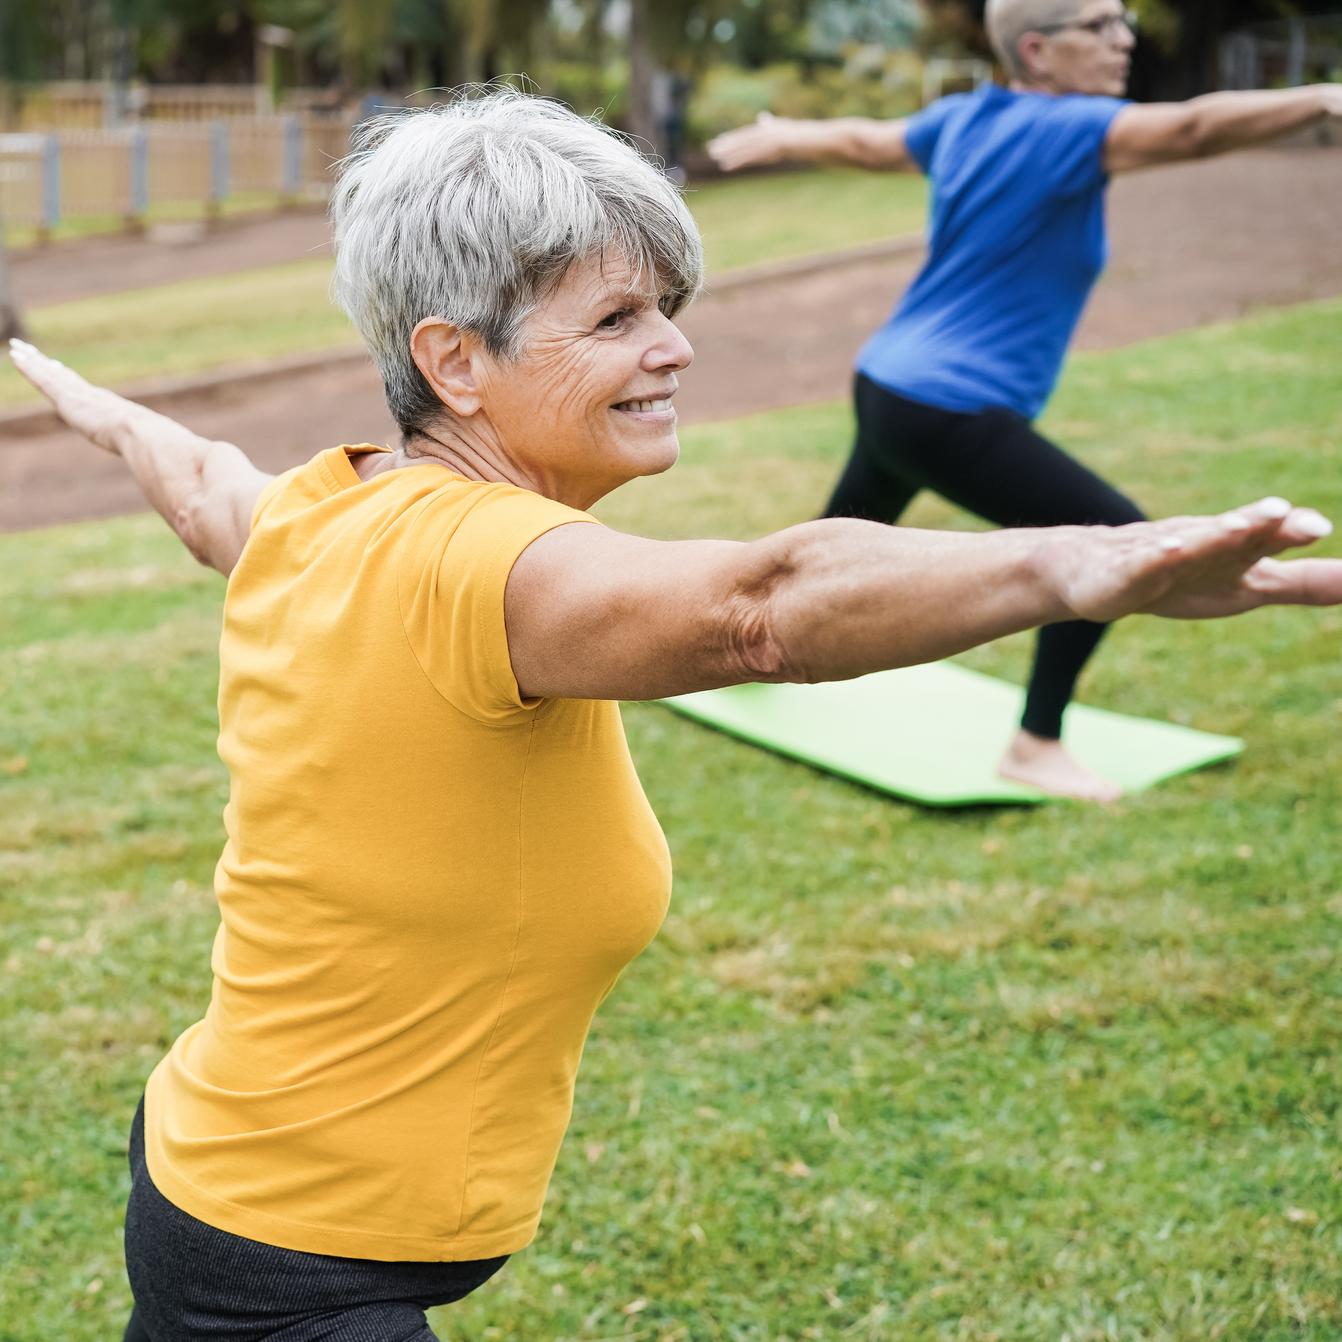 Elderly people doing exercise in the park